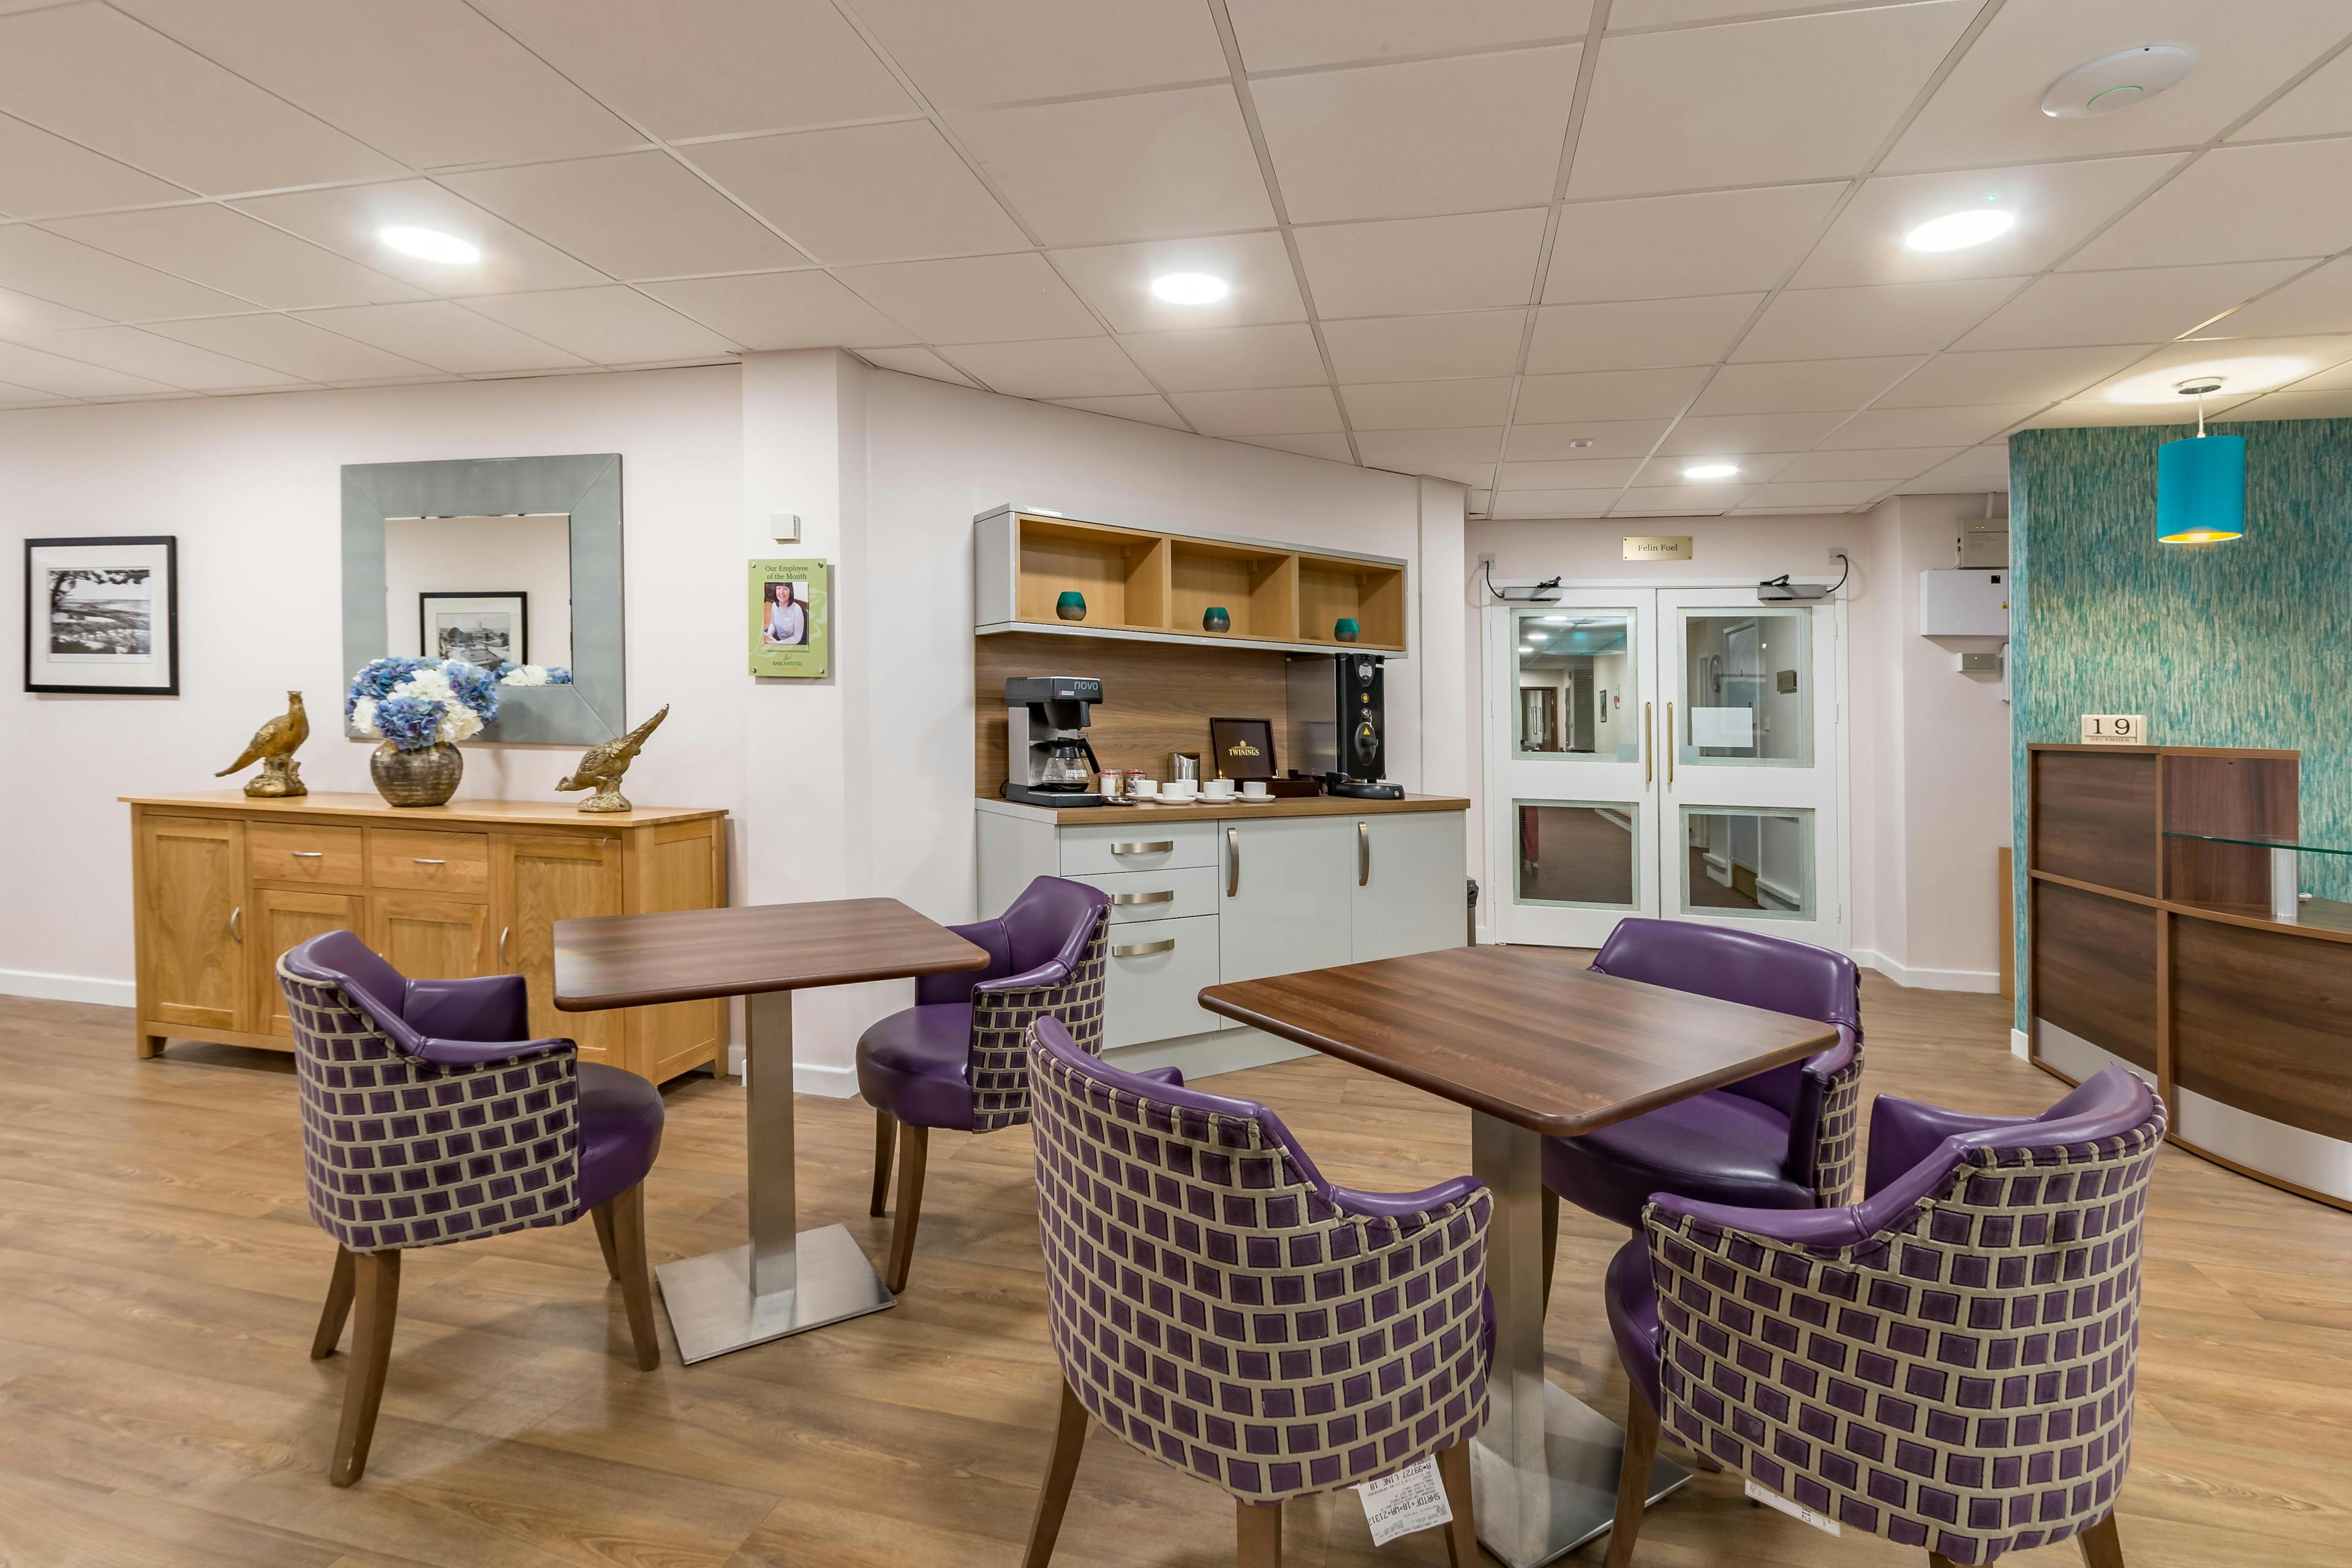 Dining area of Hafan-Y-Coed Care Home in Llanelli, Wales